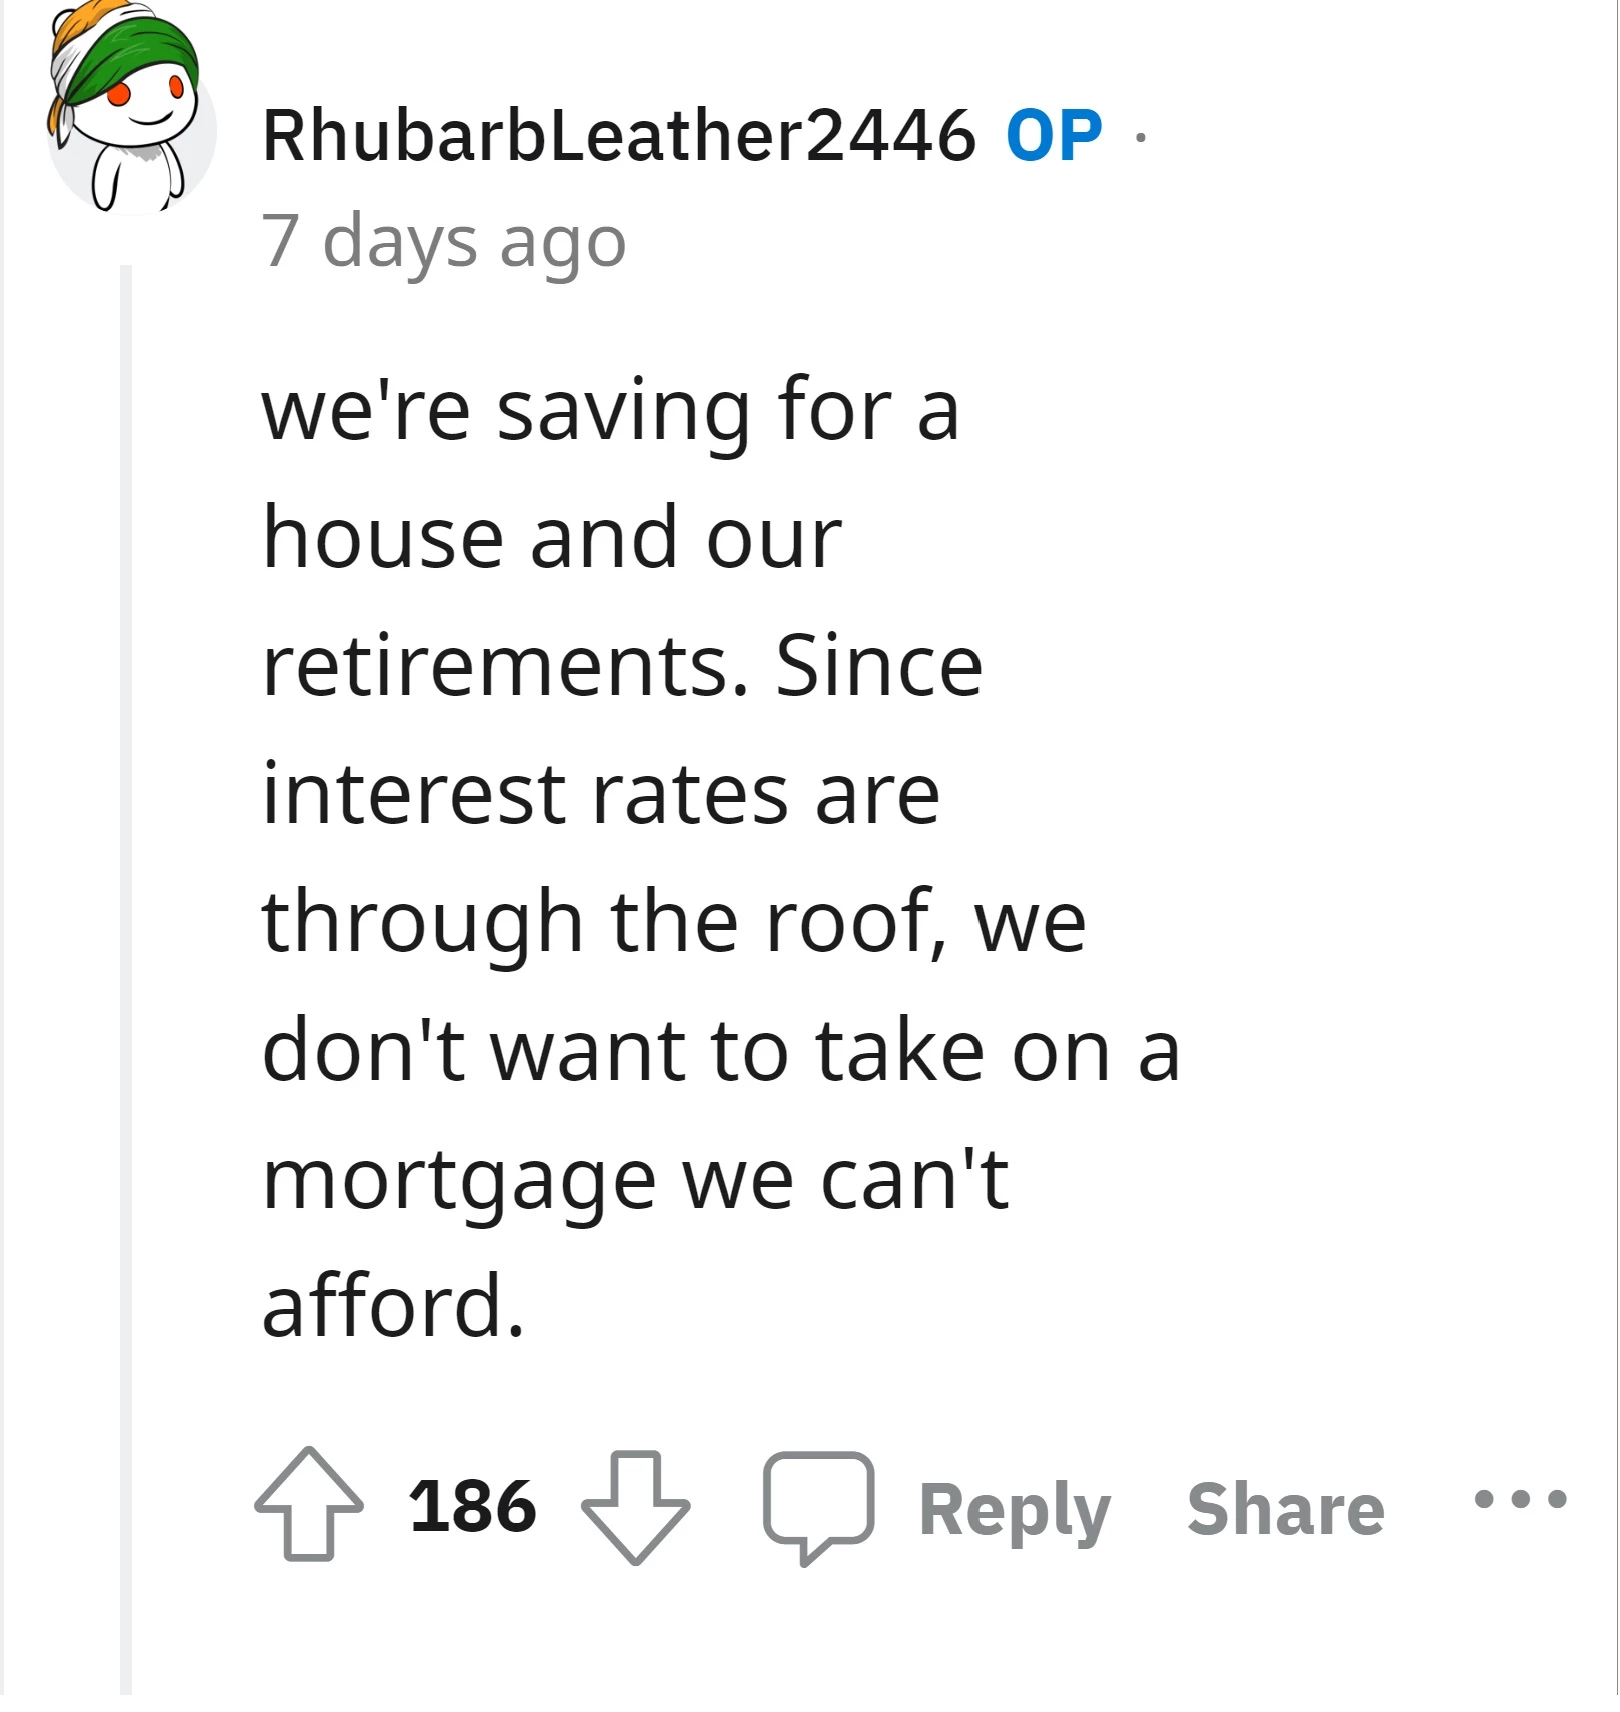 Thank God OP justified his spending and explained their financial plan